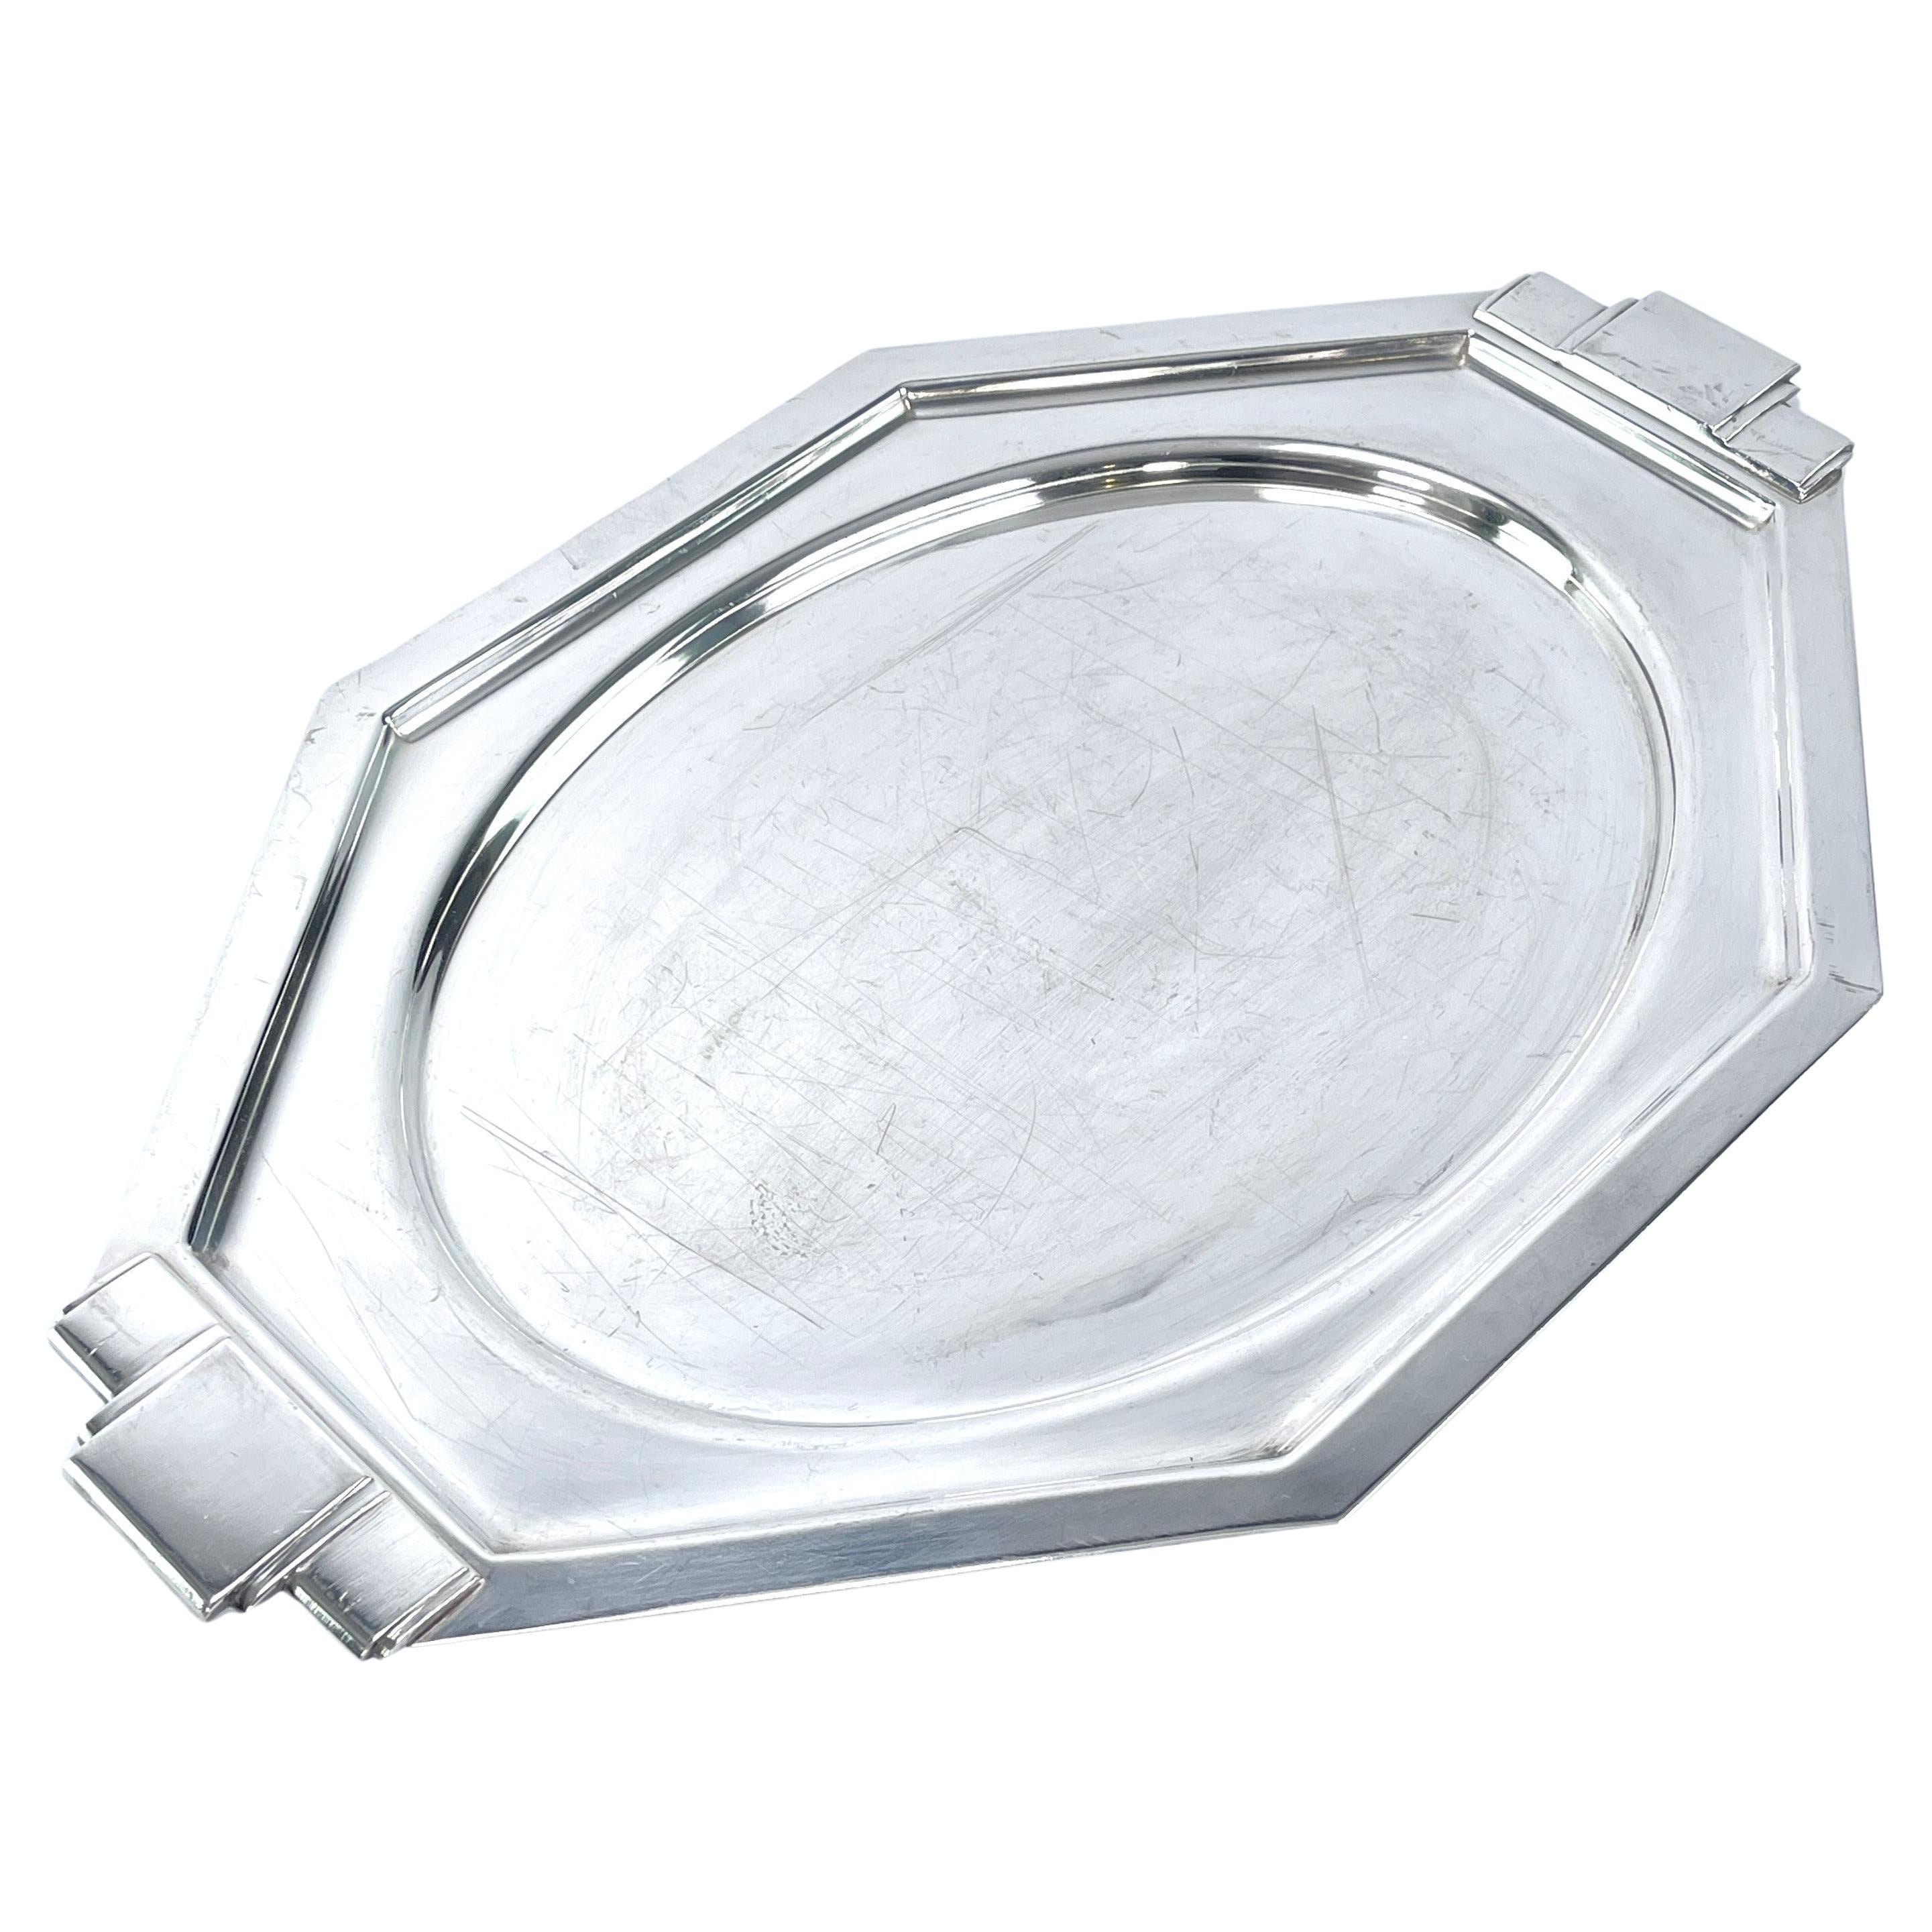 Art Deco Mirror Tray, silver plated, France, 1930s For Sale